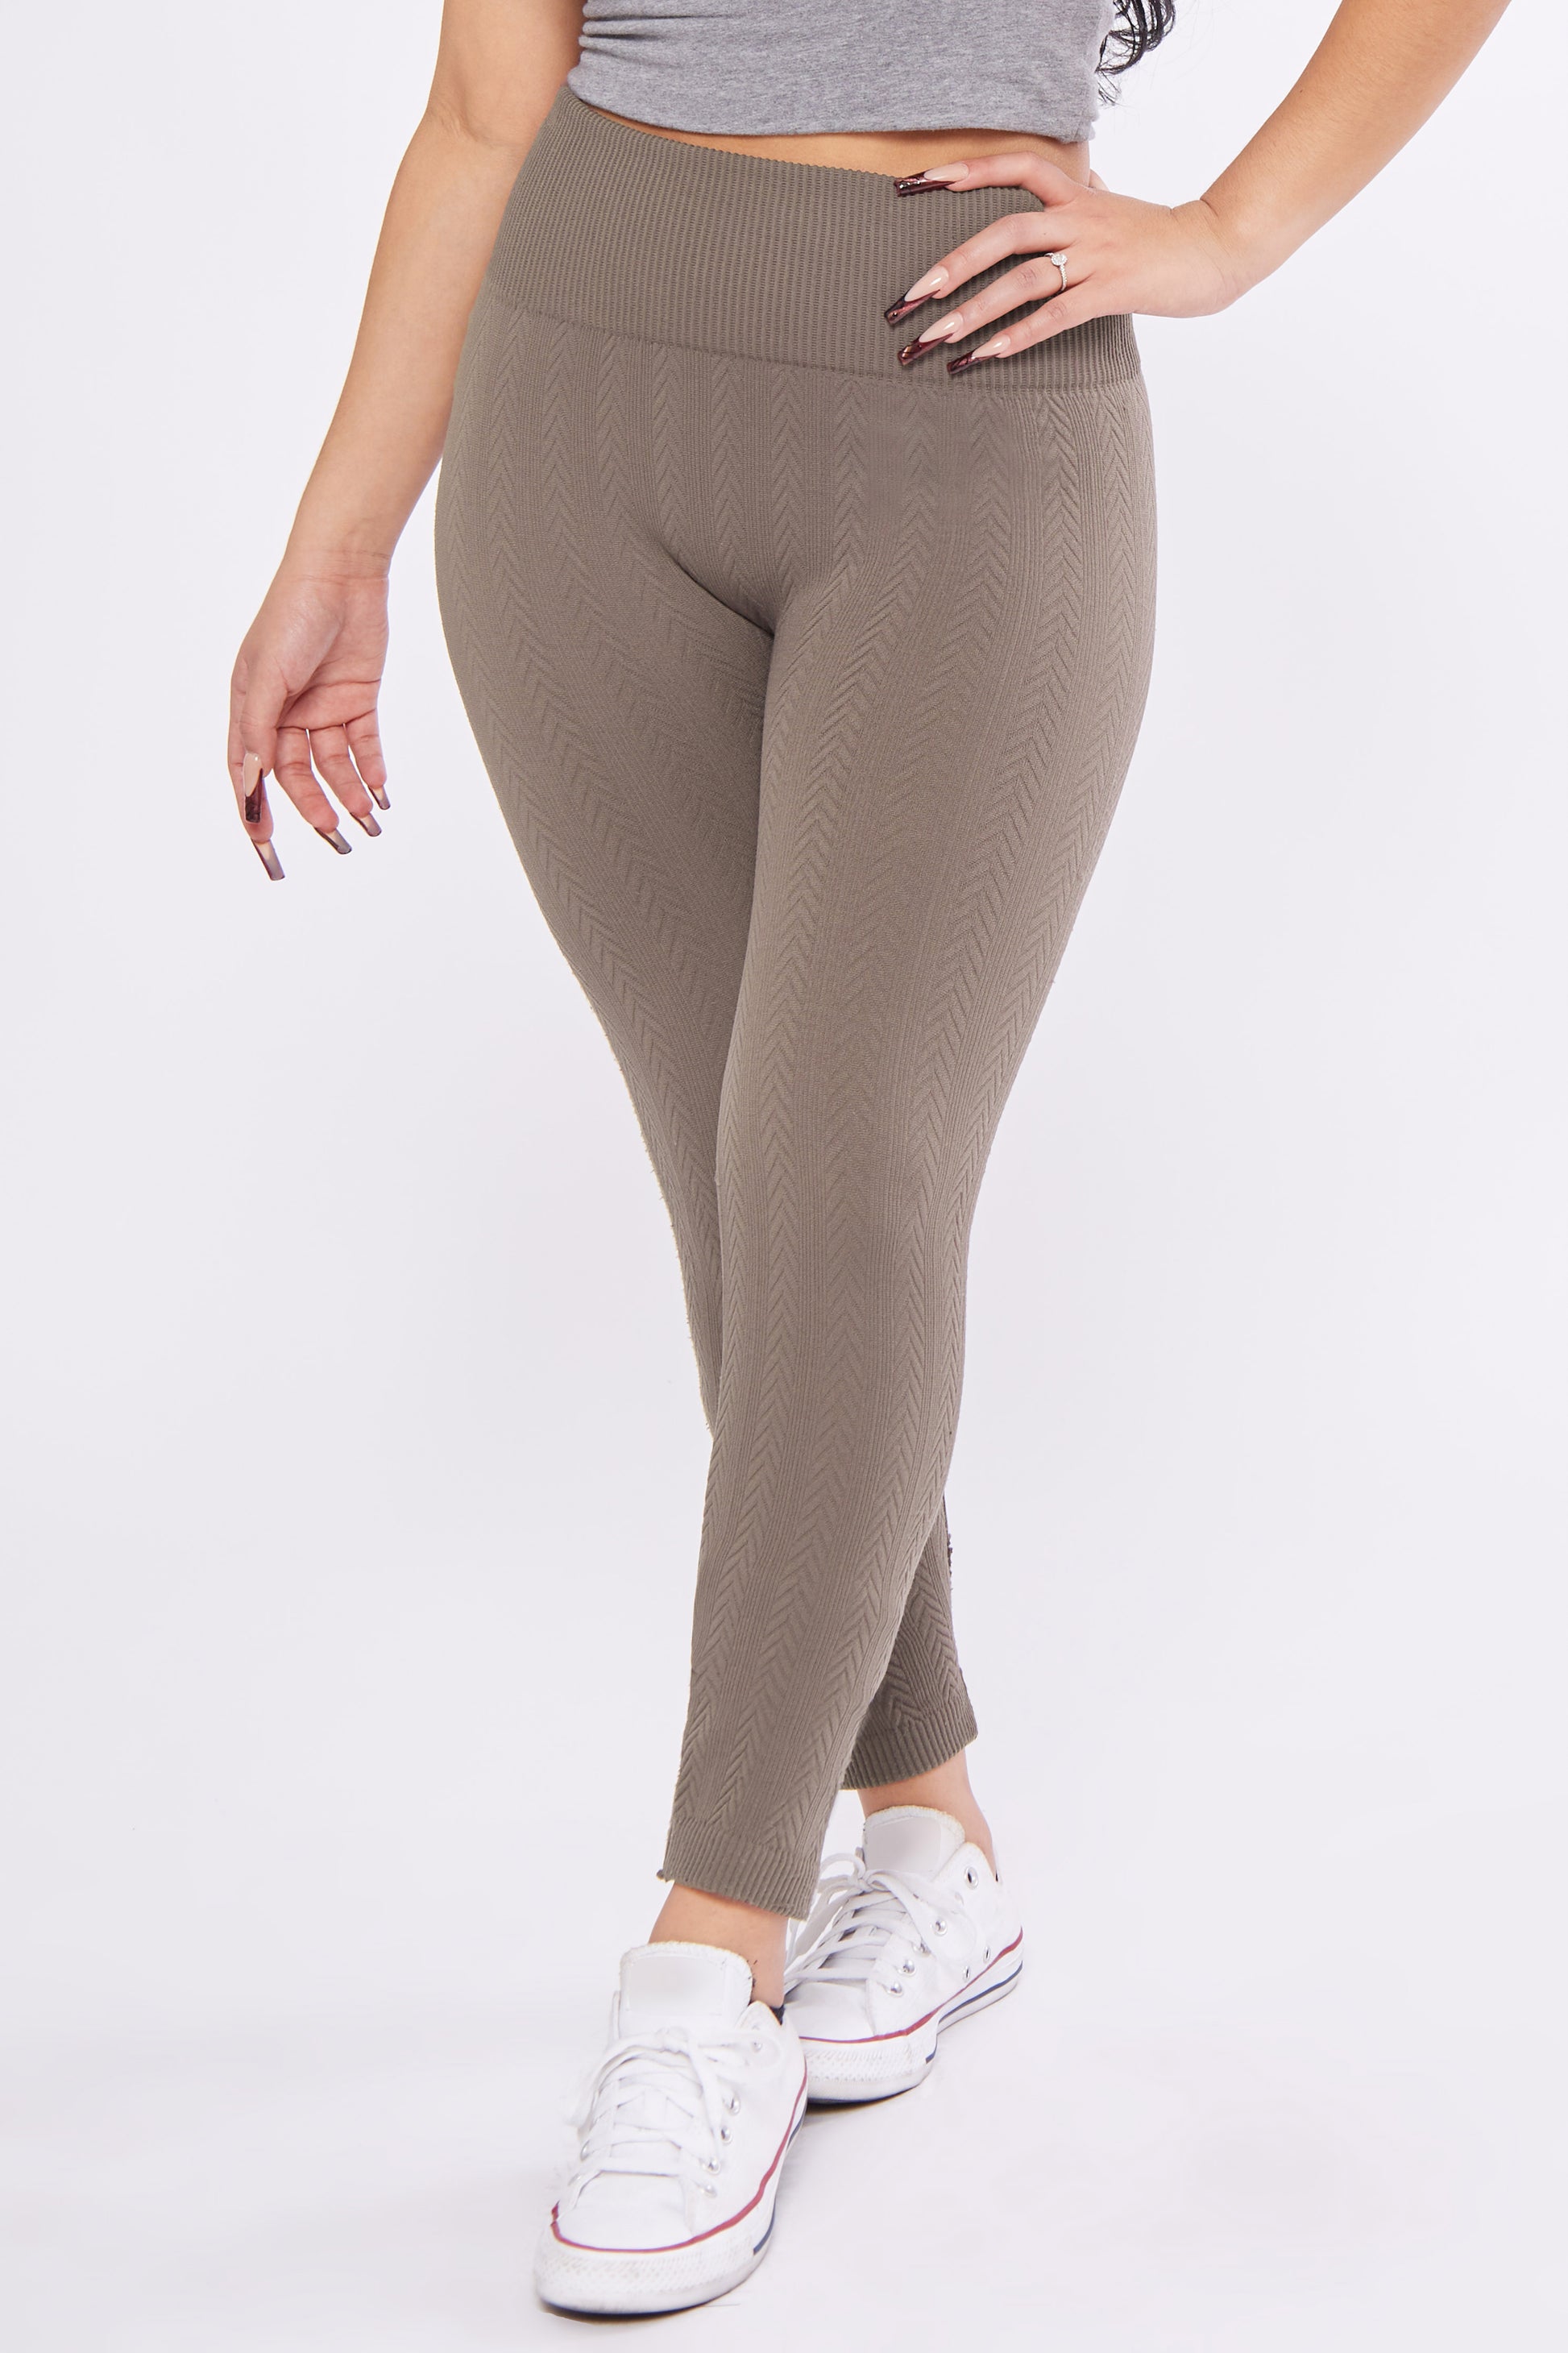 Fleeced Lined Fine Ribbed Leggings – My Sisters' Closet